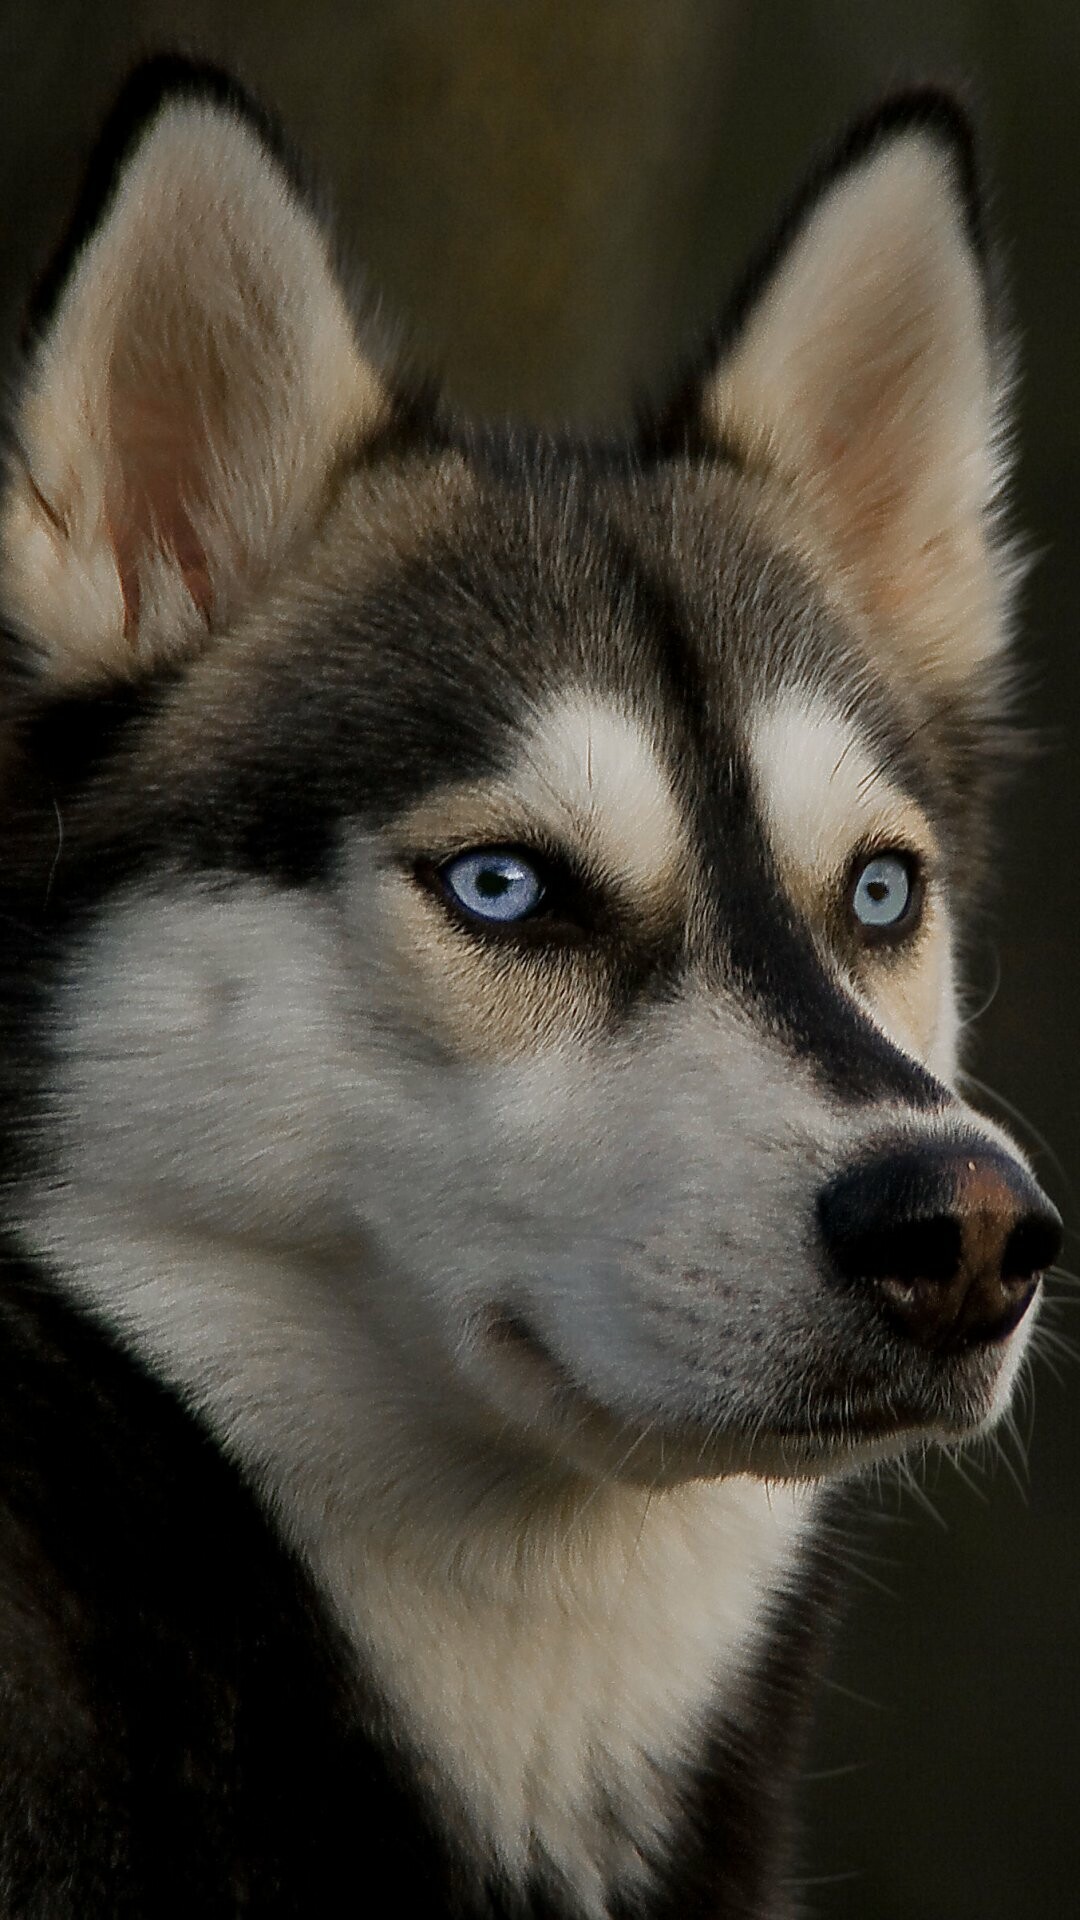 Siberian Husky: The breed do not make good guard dogs because of their friendly nature. 1080x1920 Full HD Background.